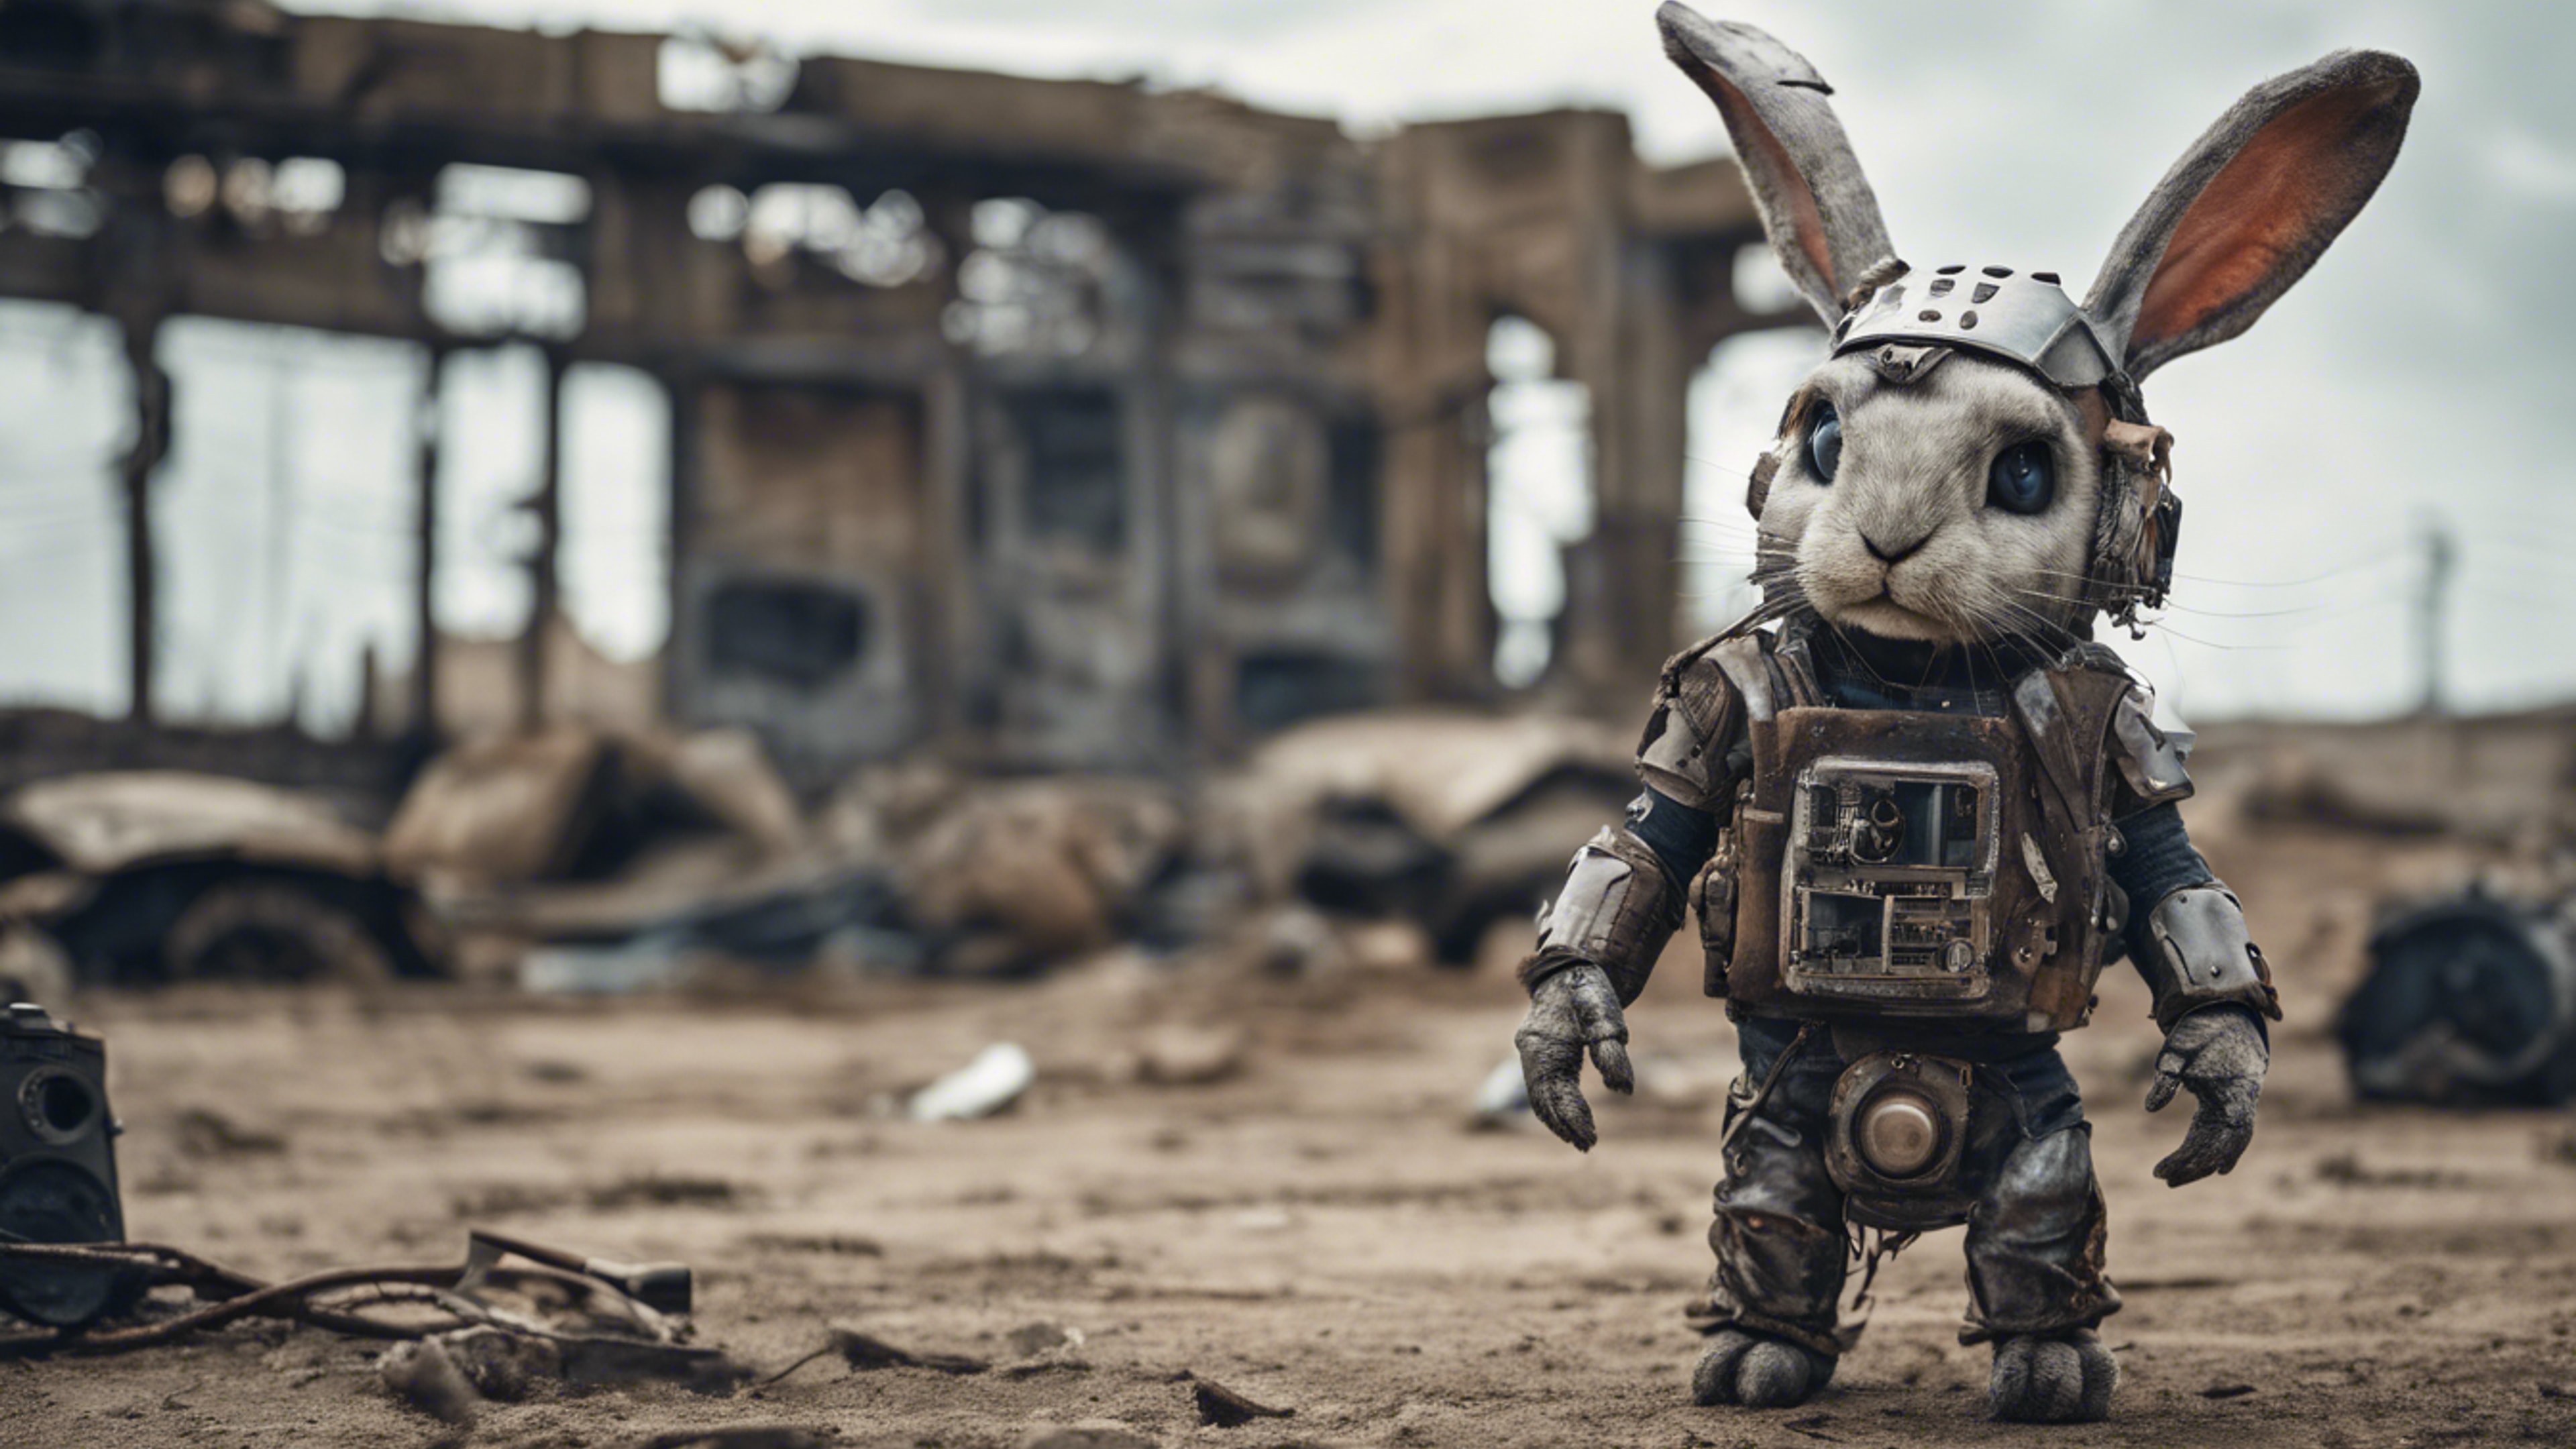 A post-apocalyptic scenario featuring a cyborg rabbit in a desolate wasteland. Wallpaper[92bb3fc1507c4f1094fc]